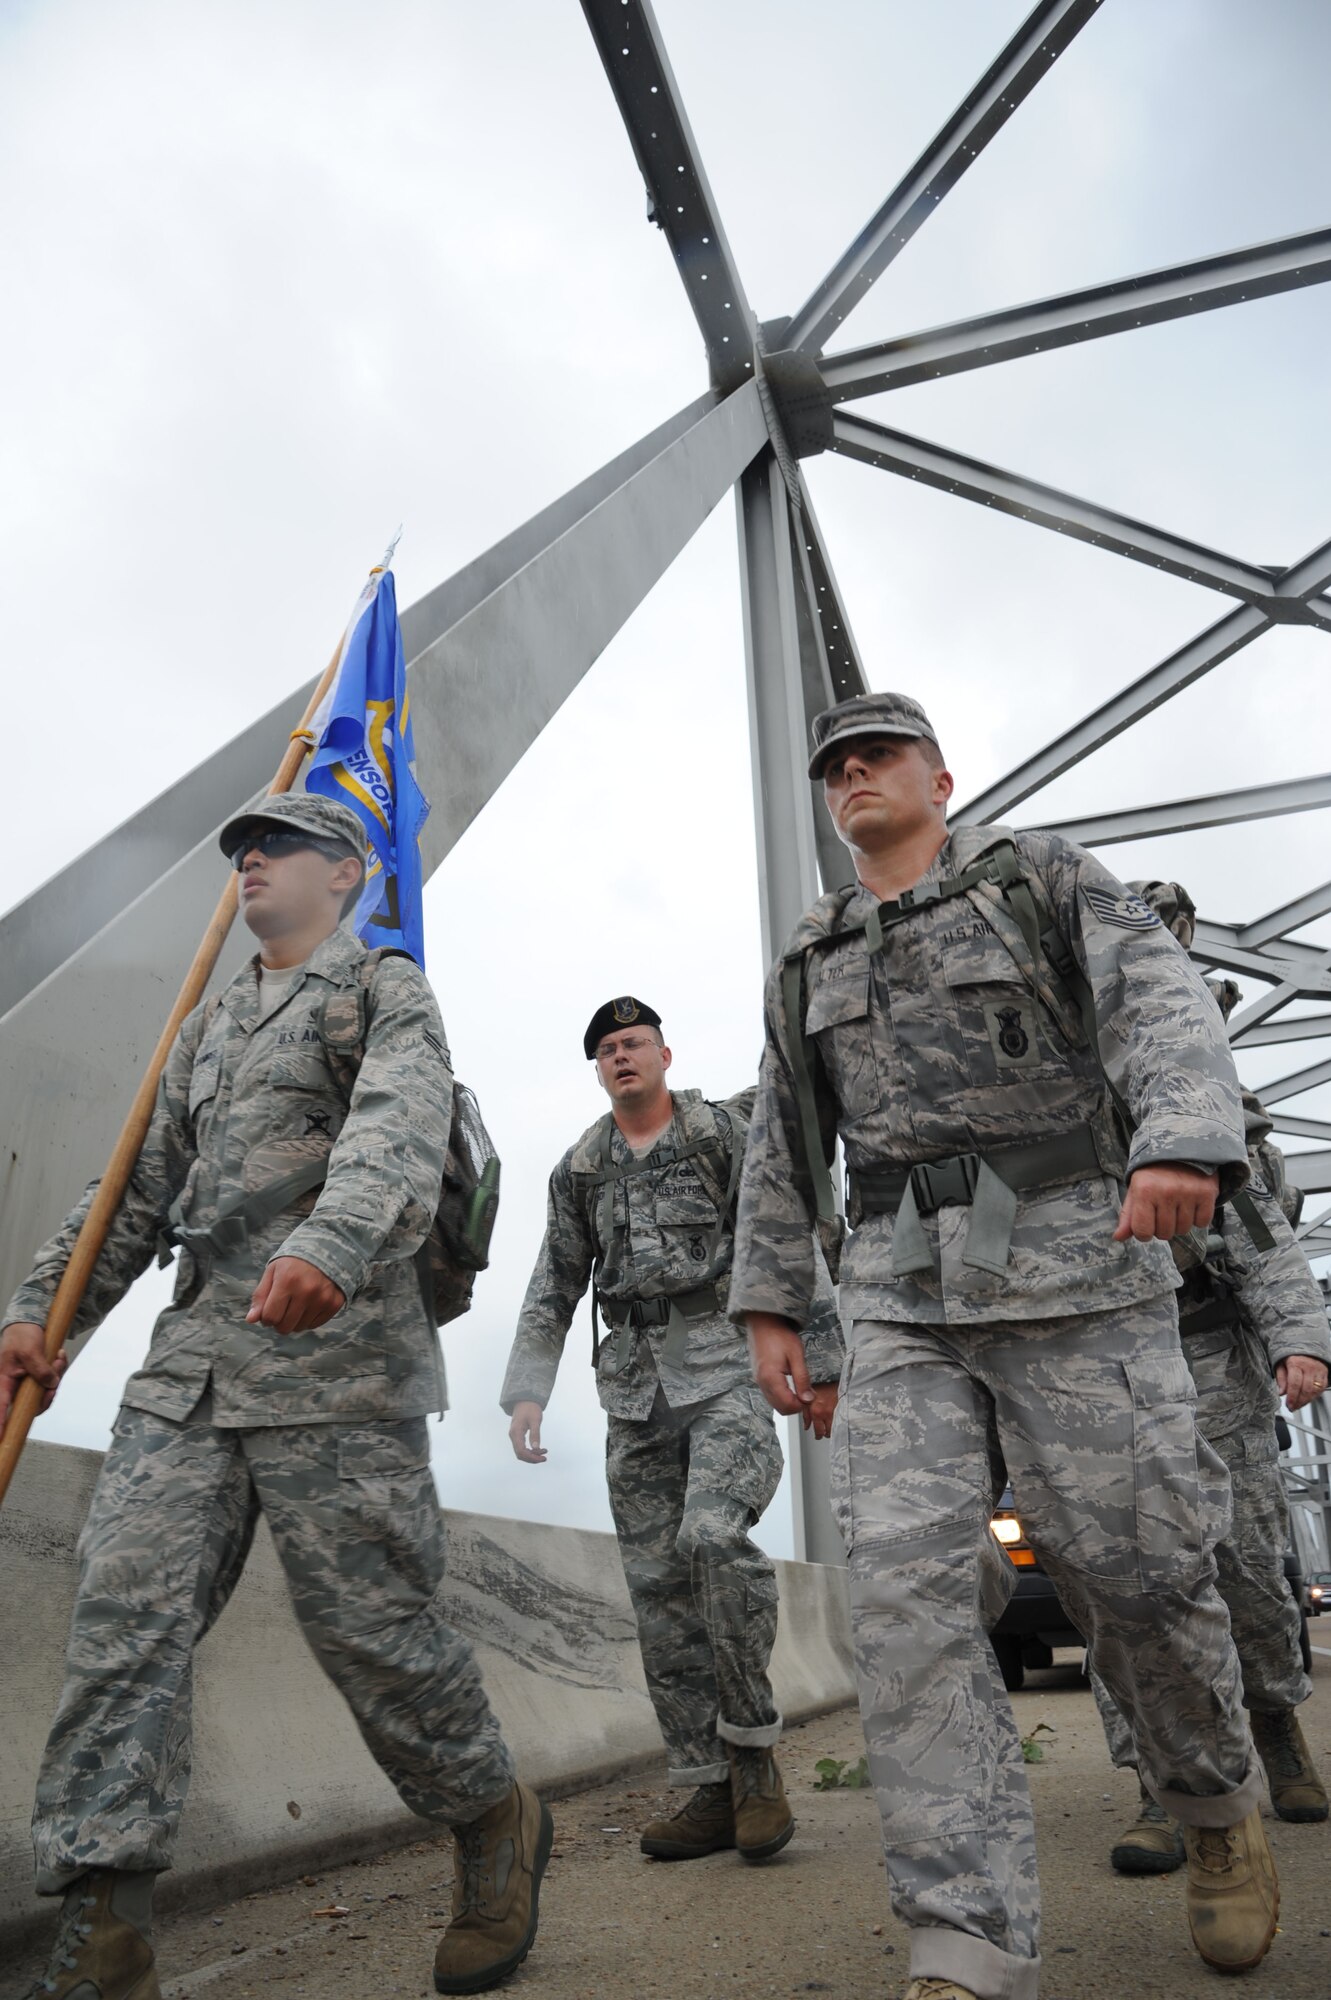 Members of the 14th Security Forces Squadron from Columbus Air Force Base, Miss., volunteering for the “Ruck March to Remember,” march across the Vidalia-Natchez Bridge heading east over the Mississippi River July 26. Team One marched 87 miles of the 146 mile leg assigned to the 14th SFS. (U.S. Air Force photo/Airman 1st Class Chase Hedrick)